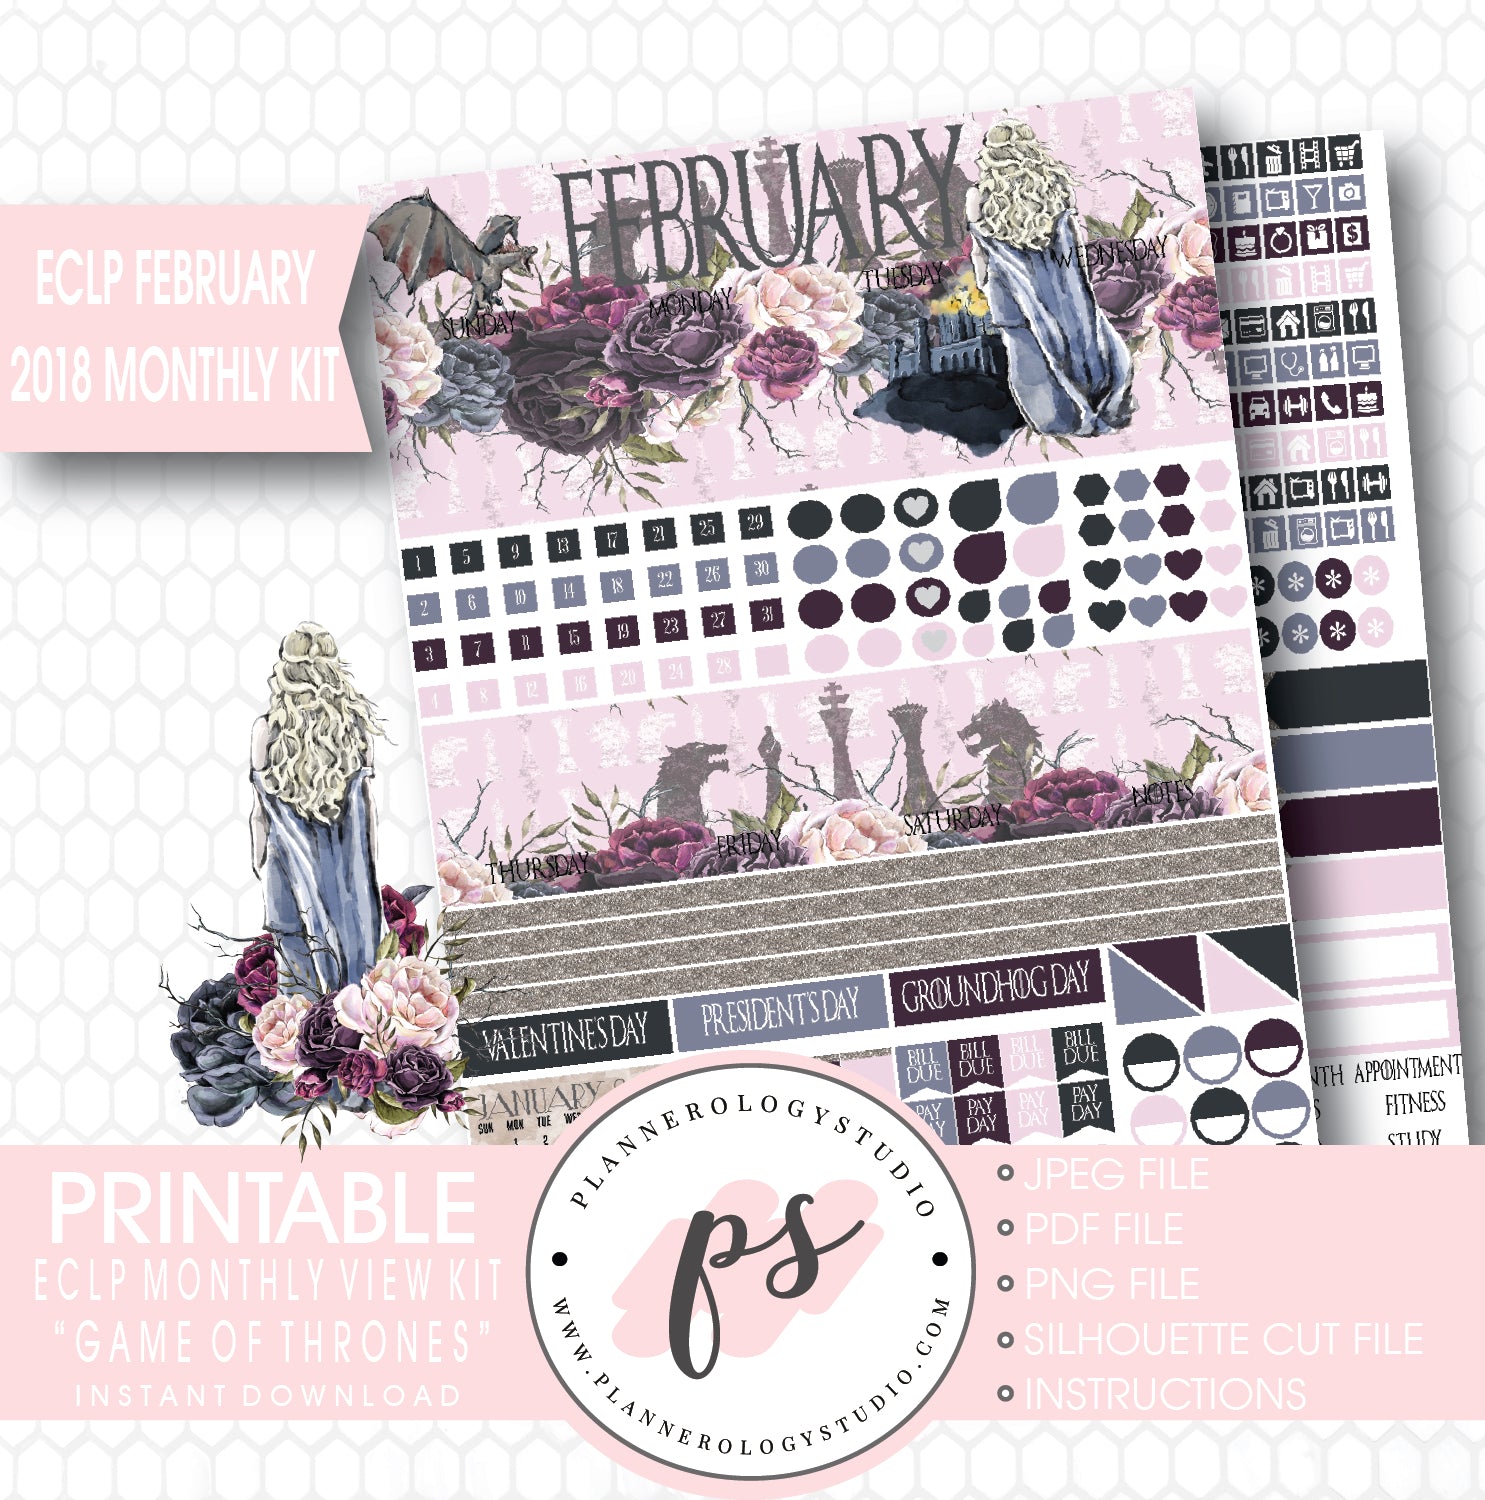 Game of Thrones (GOT) February 2018 Monthly View Kit Digital Printable Planner Stickers (for use with ECLP) - Plannerologystudio